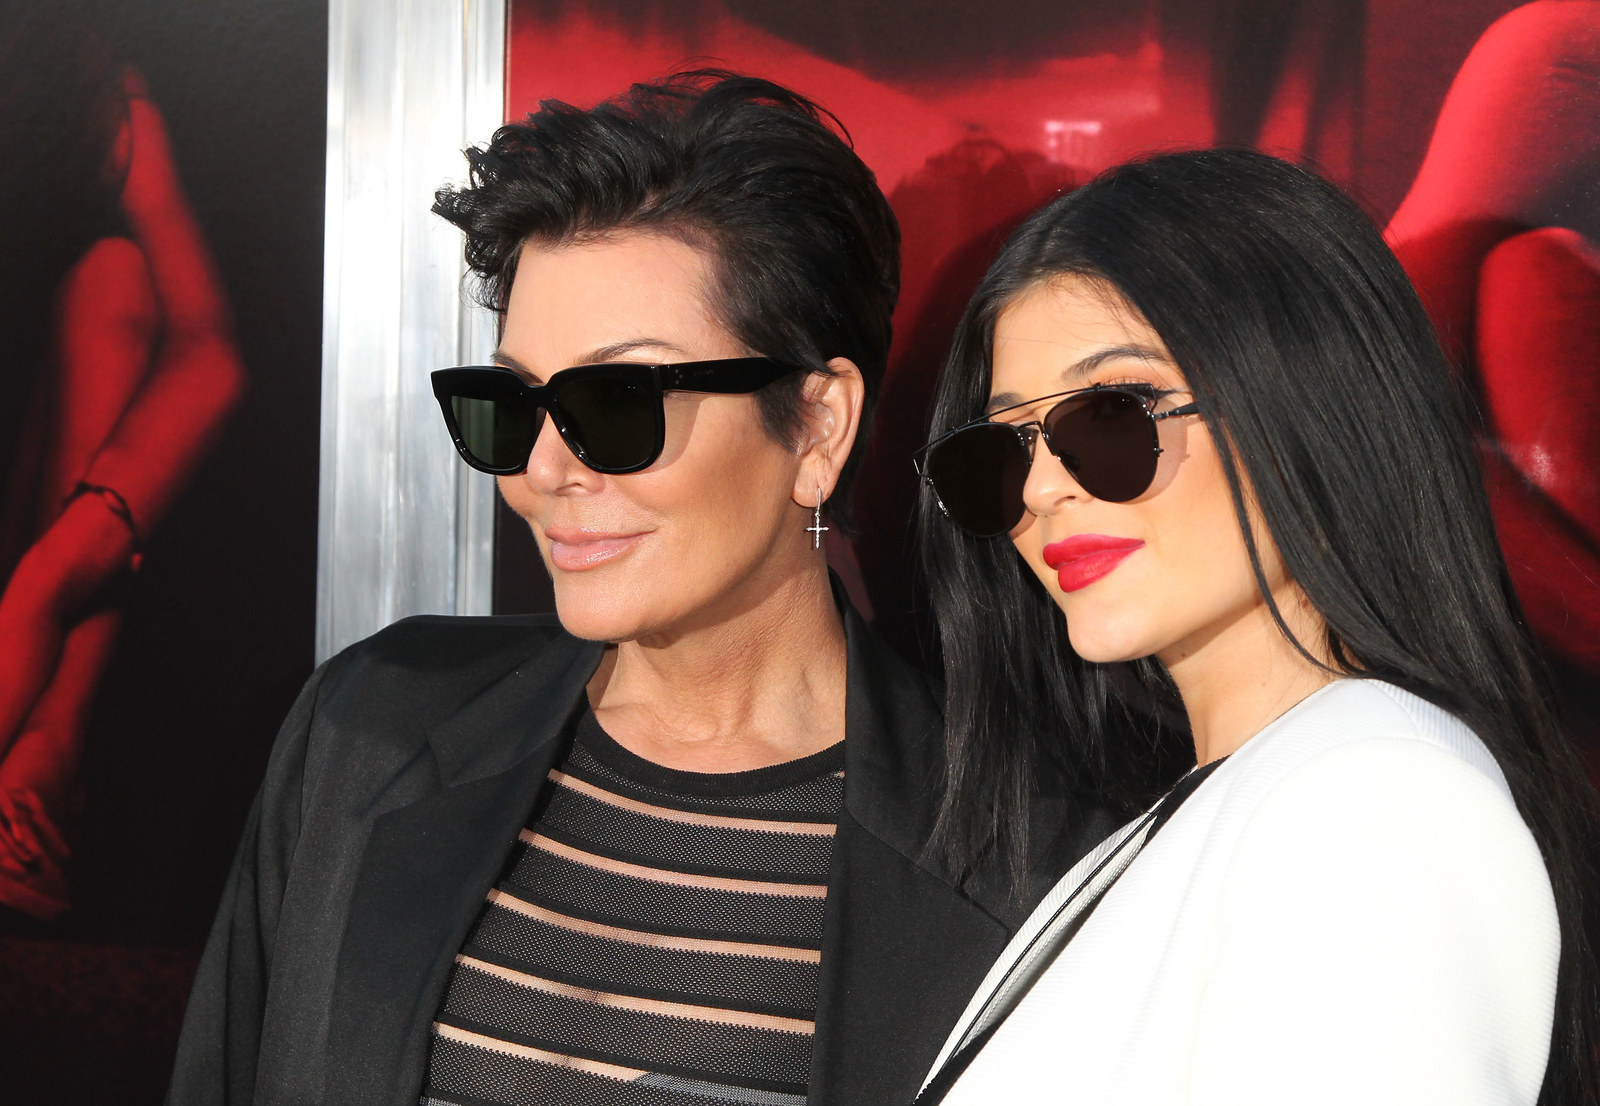 Here's What You ~Shouldn't~ Do If You Meet Kylie Jenner